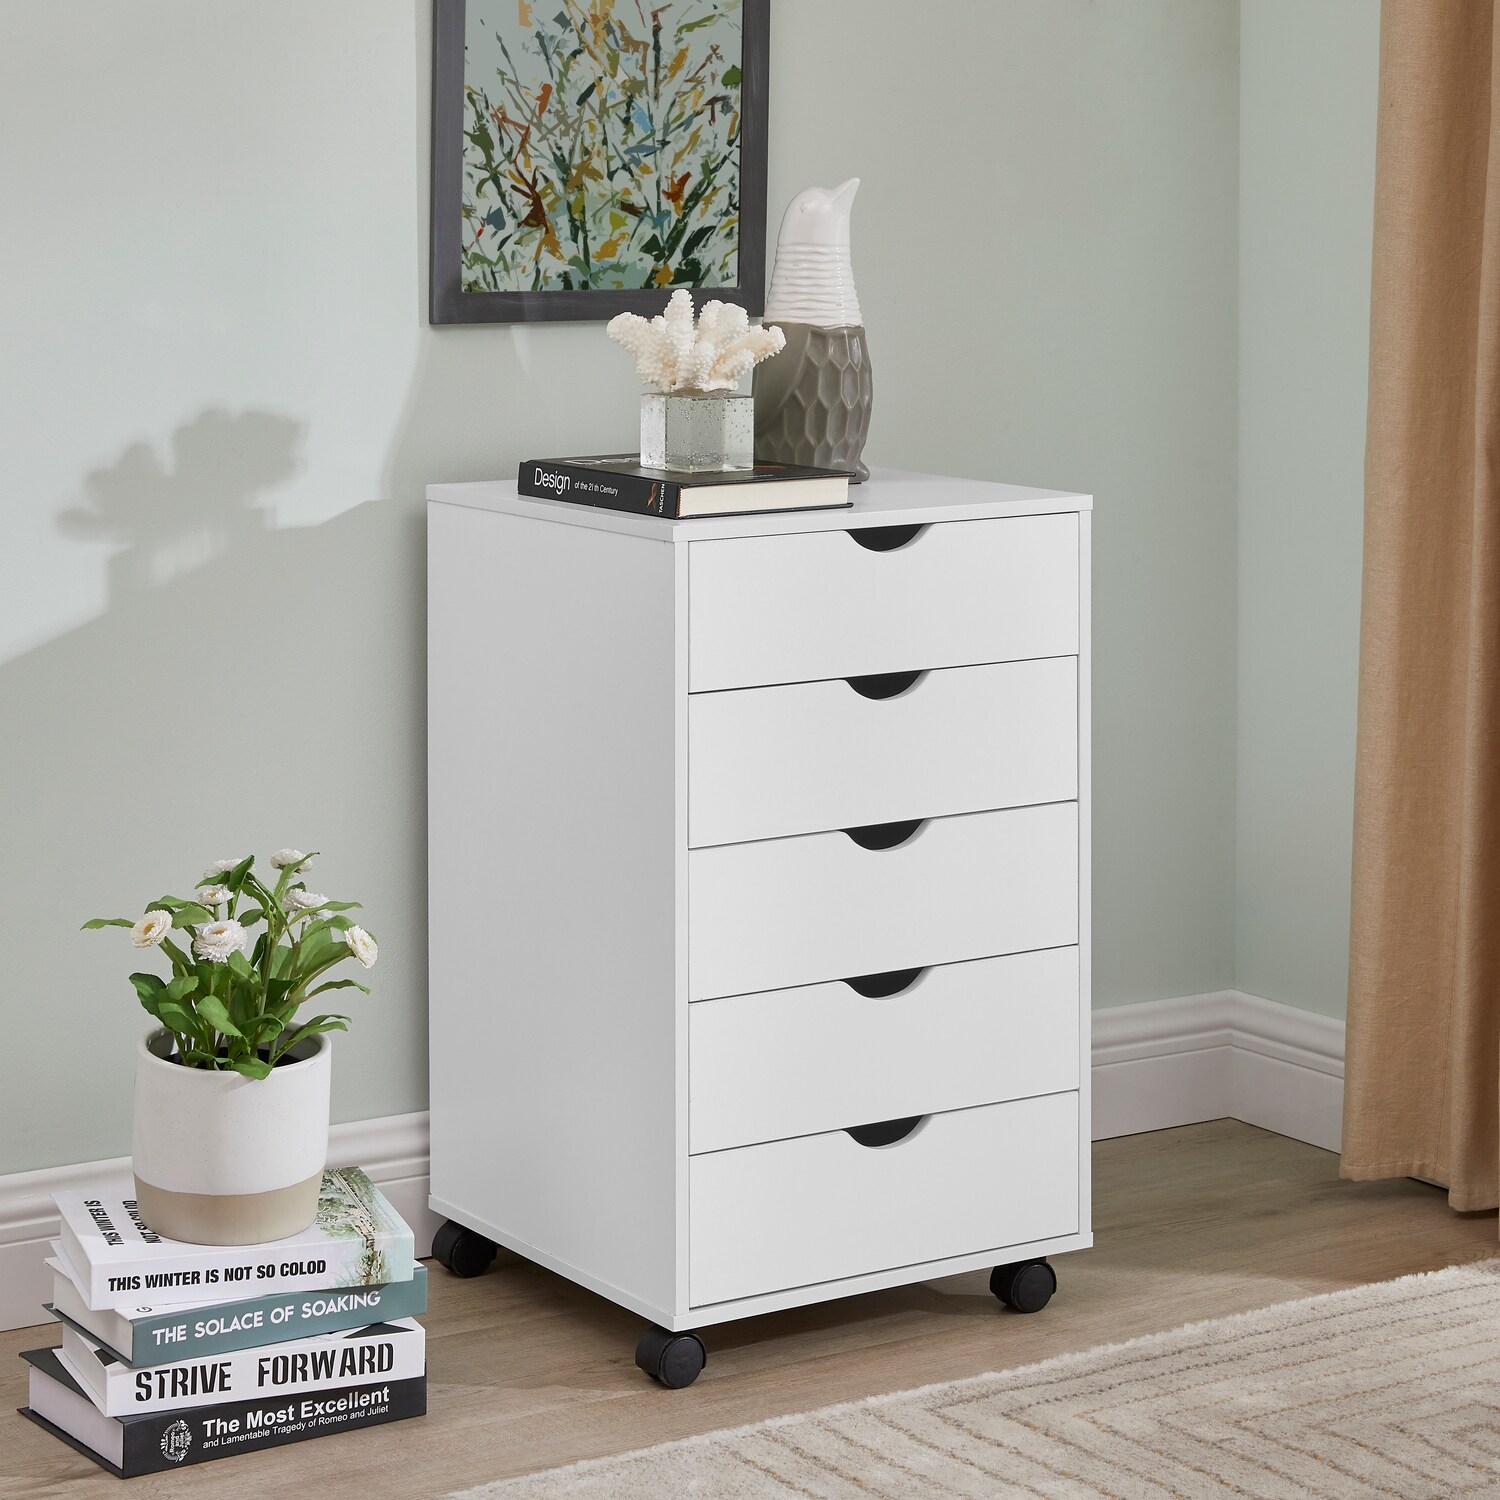 Office File Cabinets Wooden File Cabinets Lateral File Cabinet Wood File Cabinet Mobile File Cabinet Mobile Storage Cabinet White - image 1 of 5